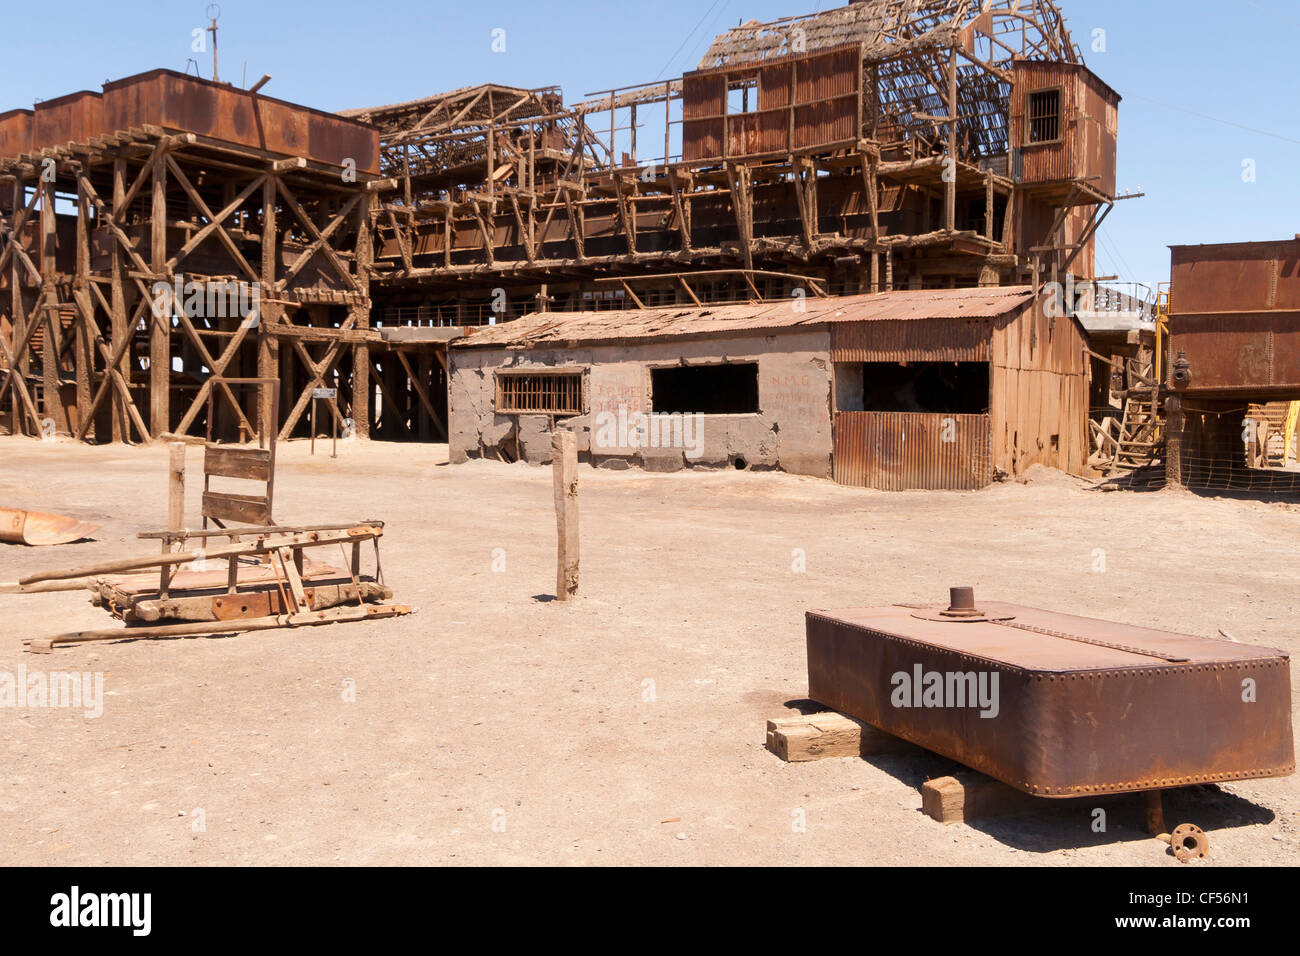 Humberstone and Santa Laura saltpeter works (UNESCO world heritage), Chile, old ghost mining town and factory (Atacama desert) Stock Photo